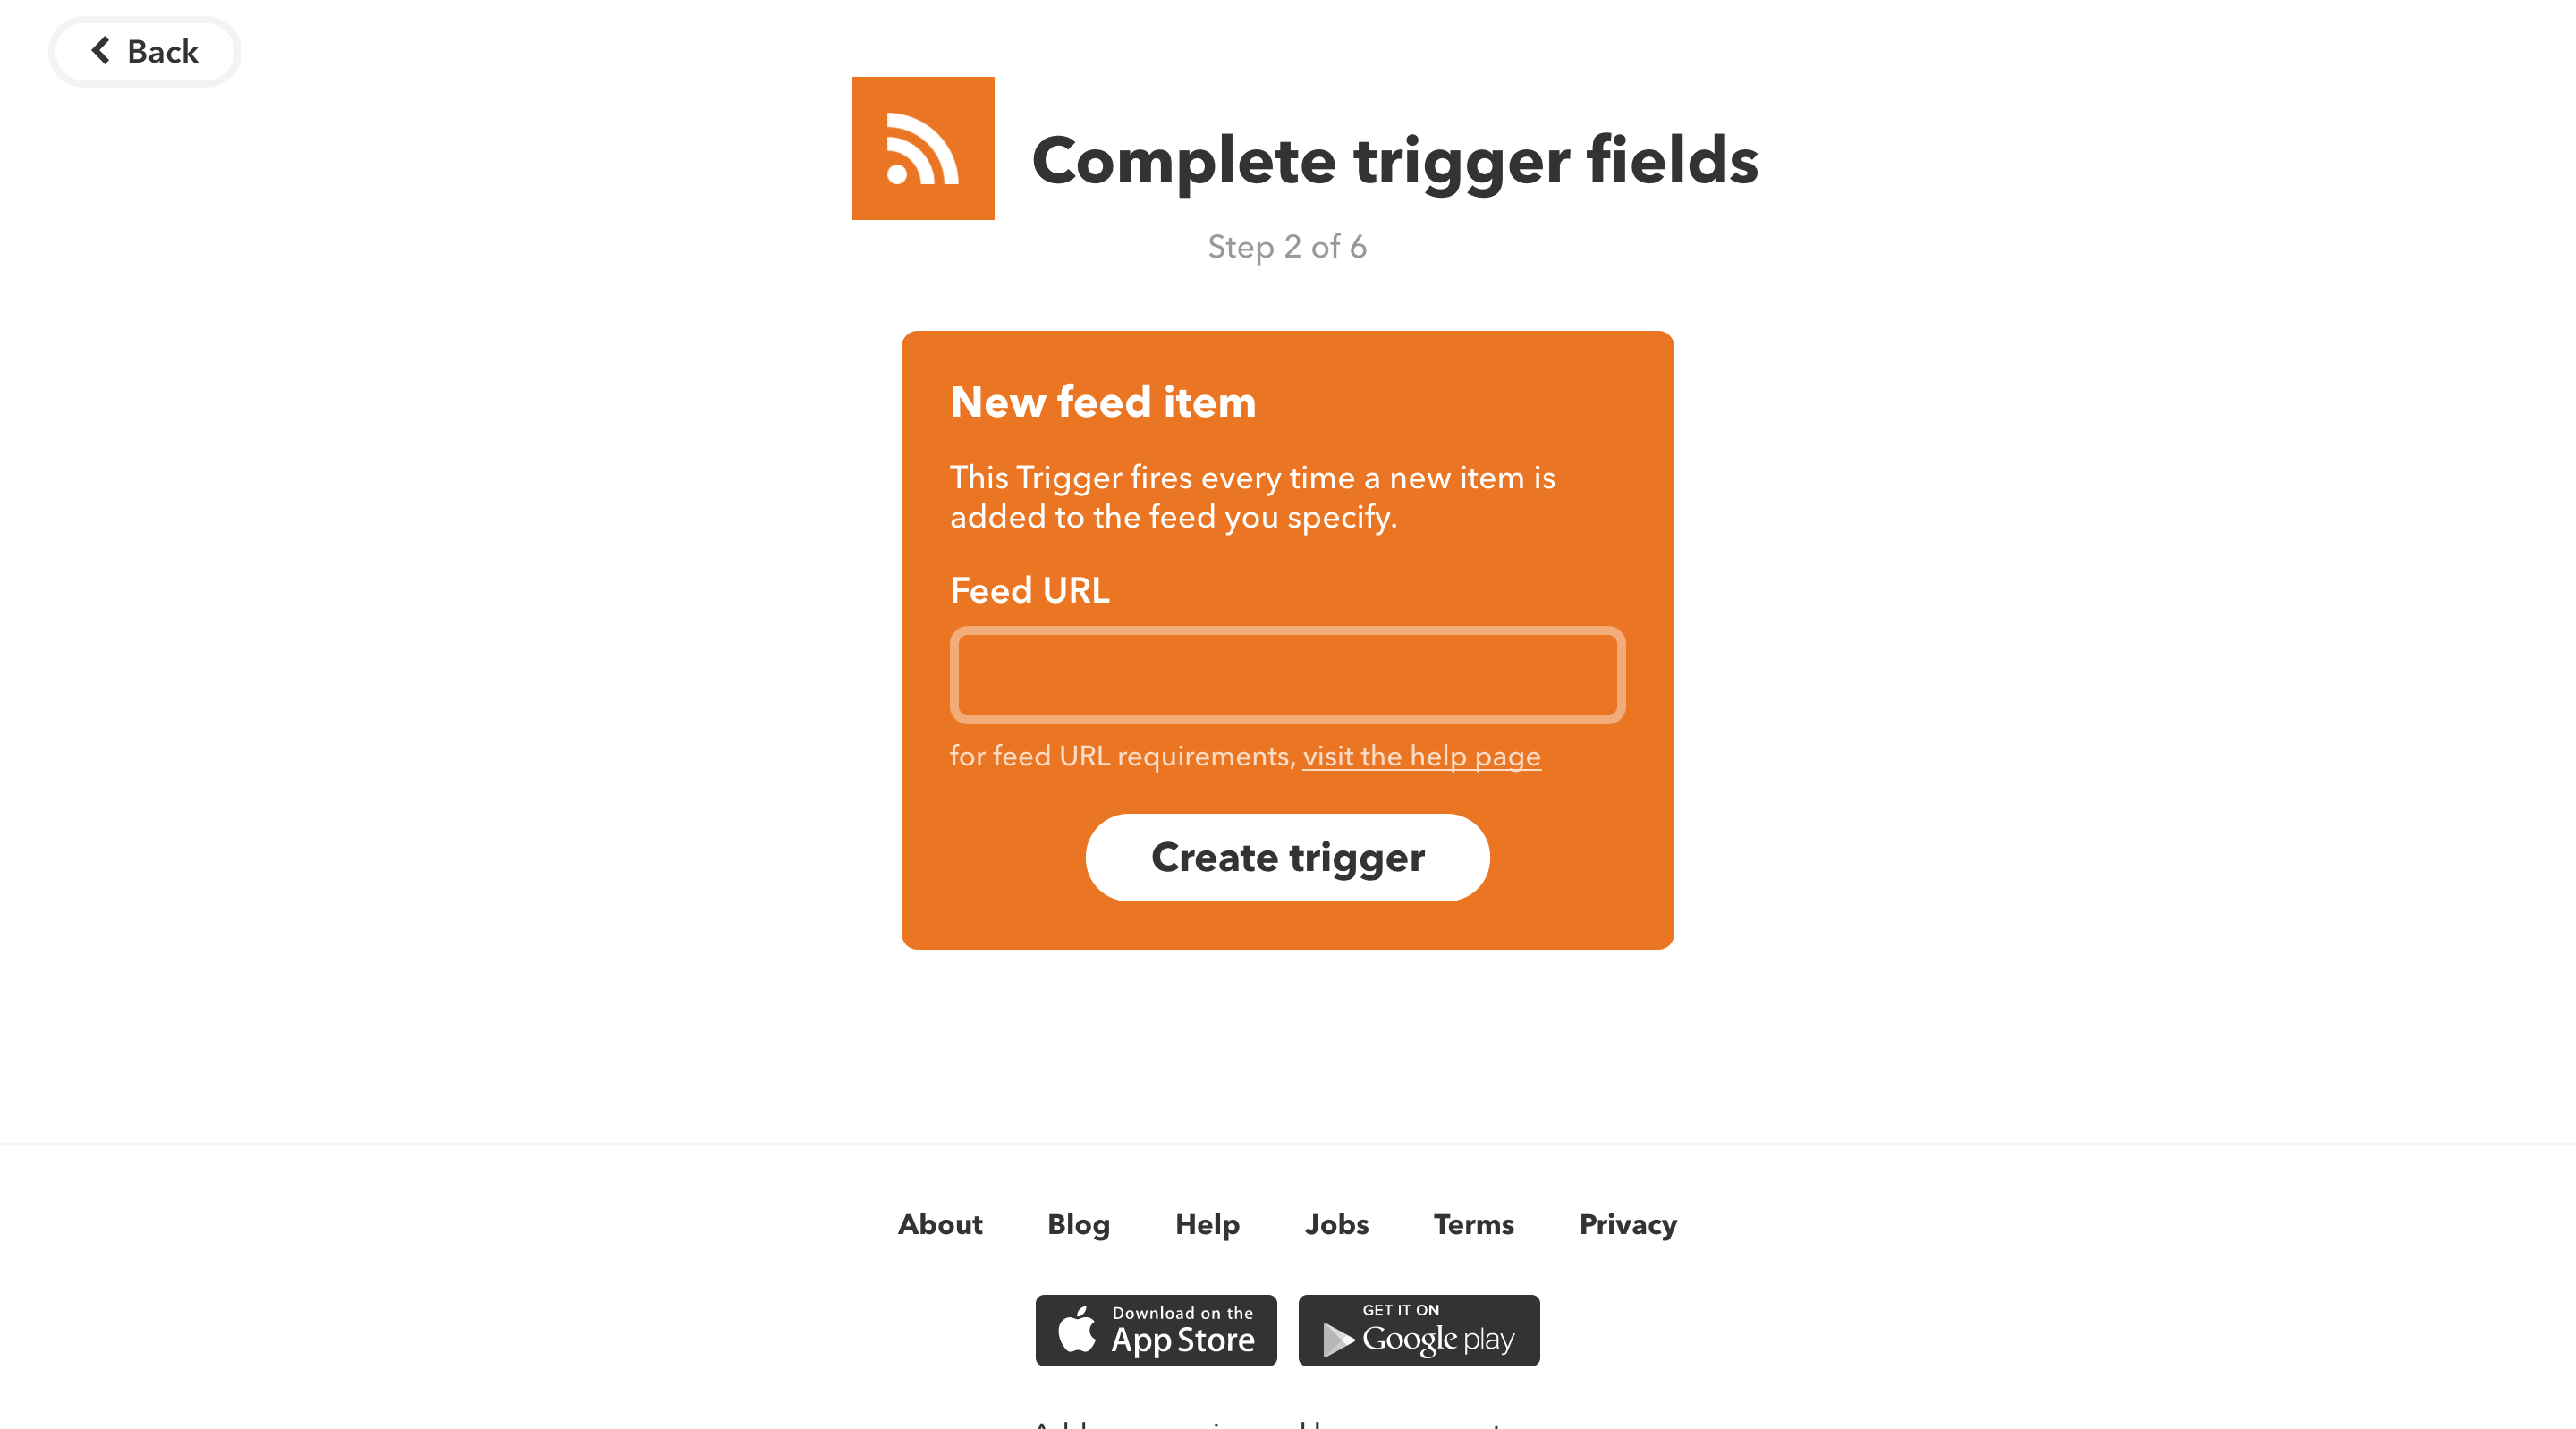 Complete trigger fields